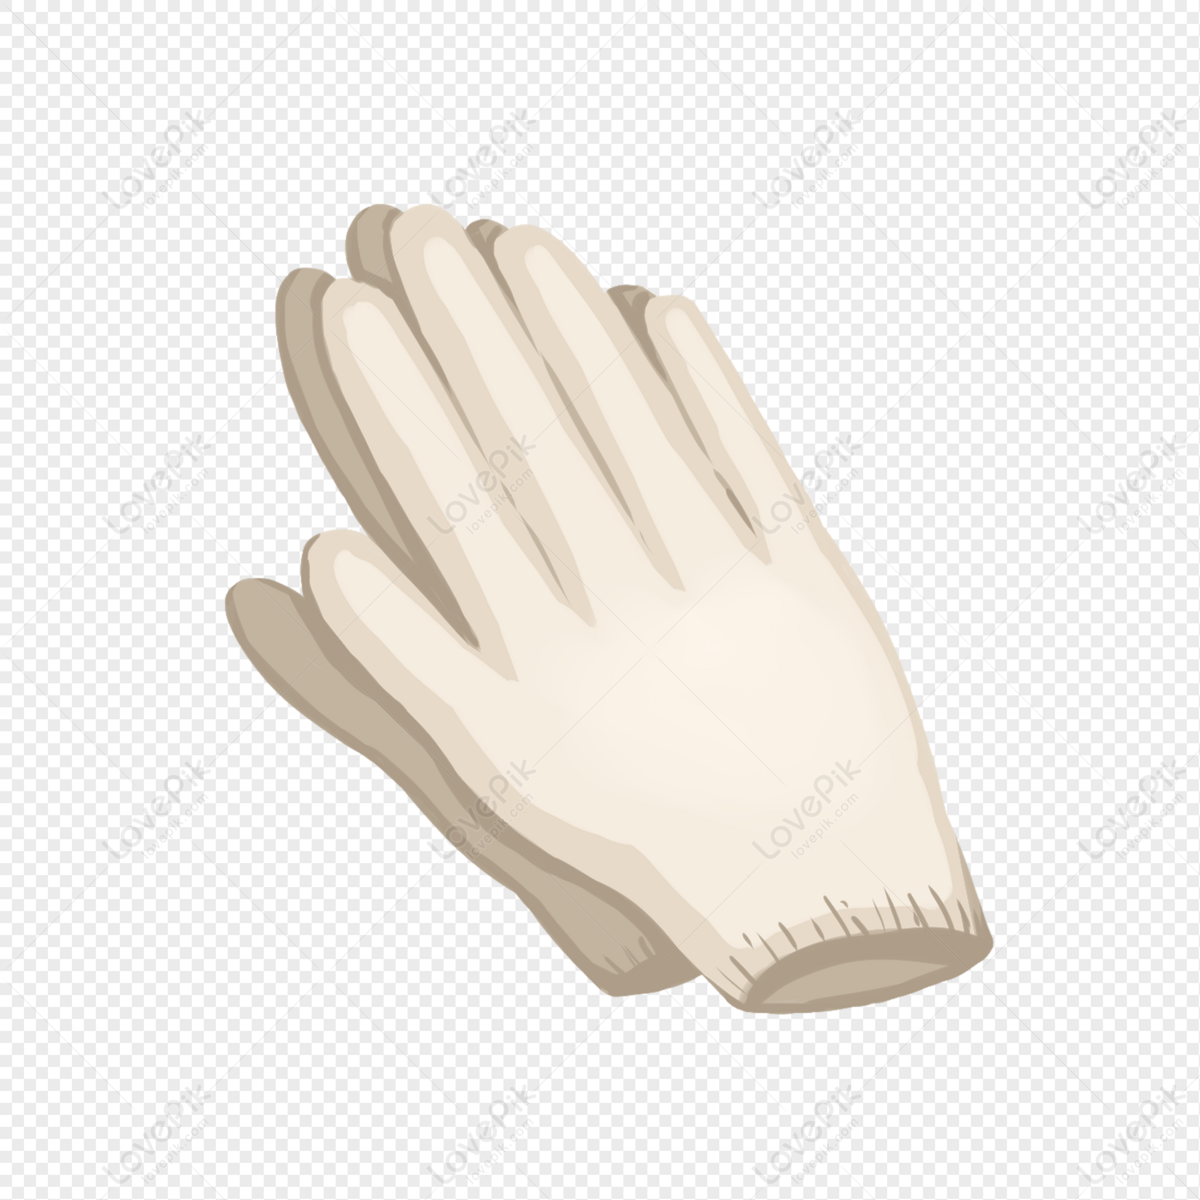 Hand Painted White Gloves Elements PNG Hd Transparent Image And Clipart  Image For Free Download - Lovepik | 401315784